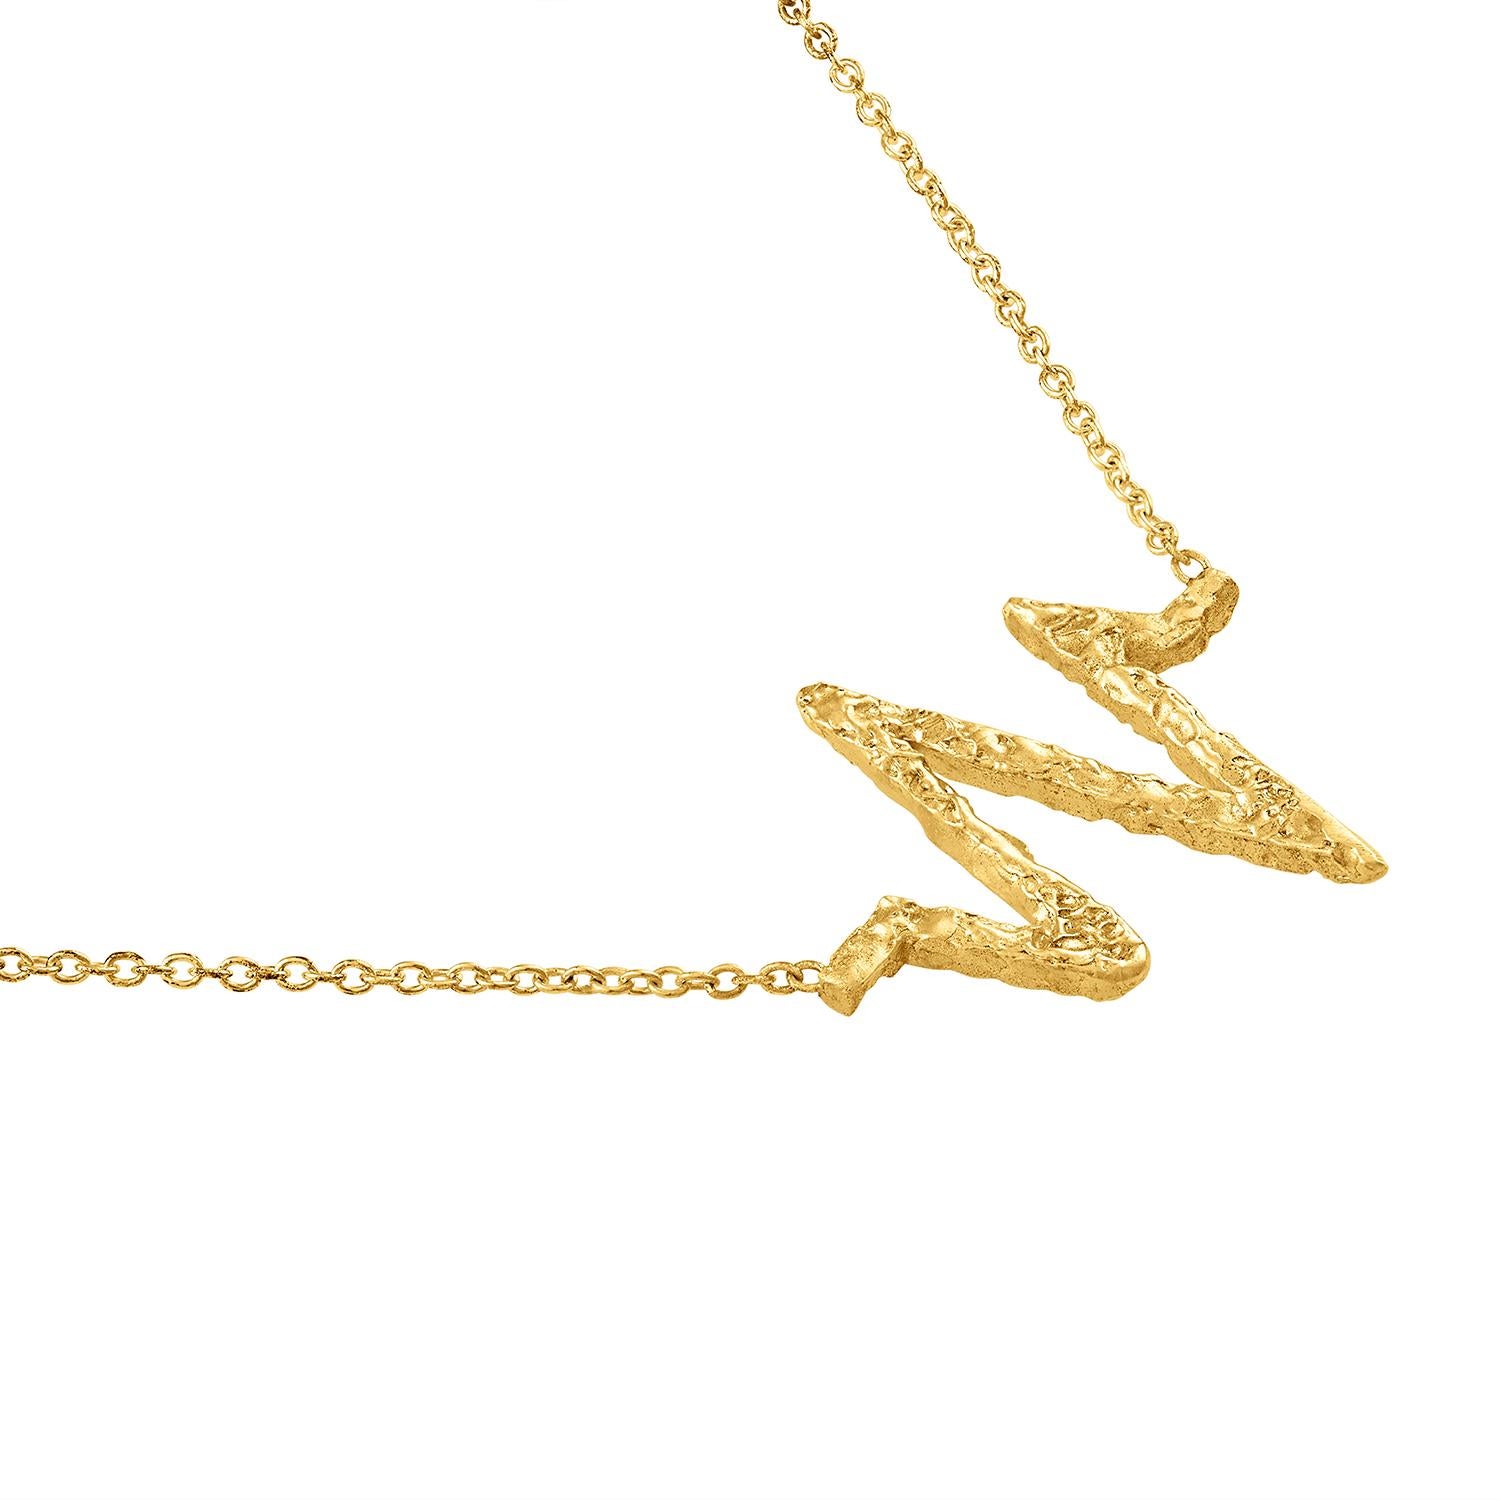 Embrace the rhythm of the universe with this exquisite 22k gold necklace featuring the captivating frequency symbol. This delicate pendant, shimmering with the warmth of pure gold, acts as a constant reminder to align with the unseen forces that